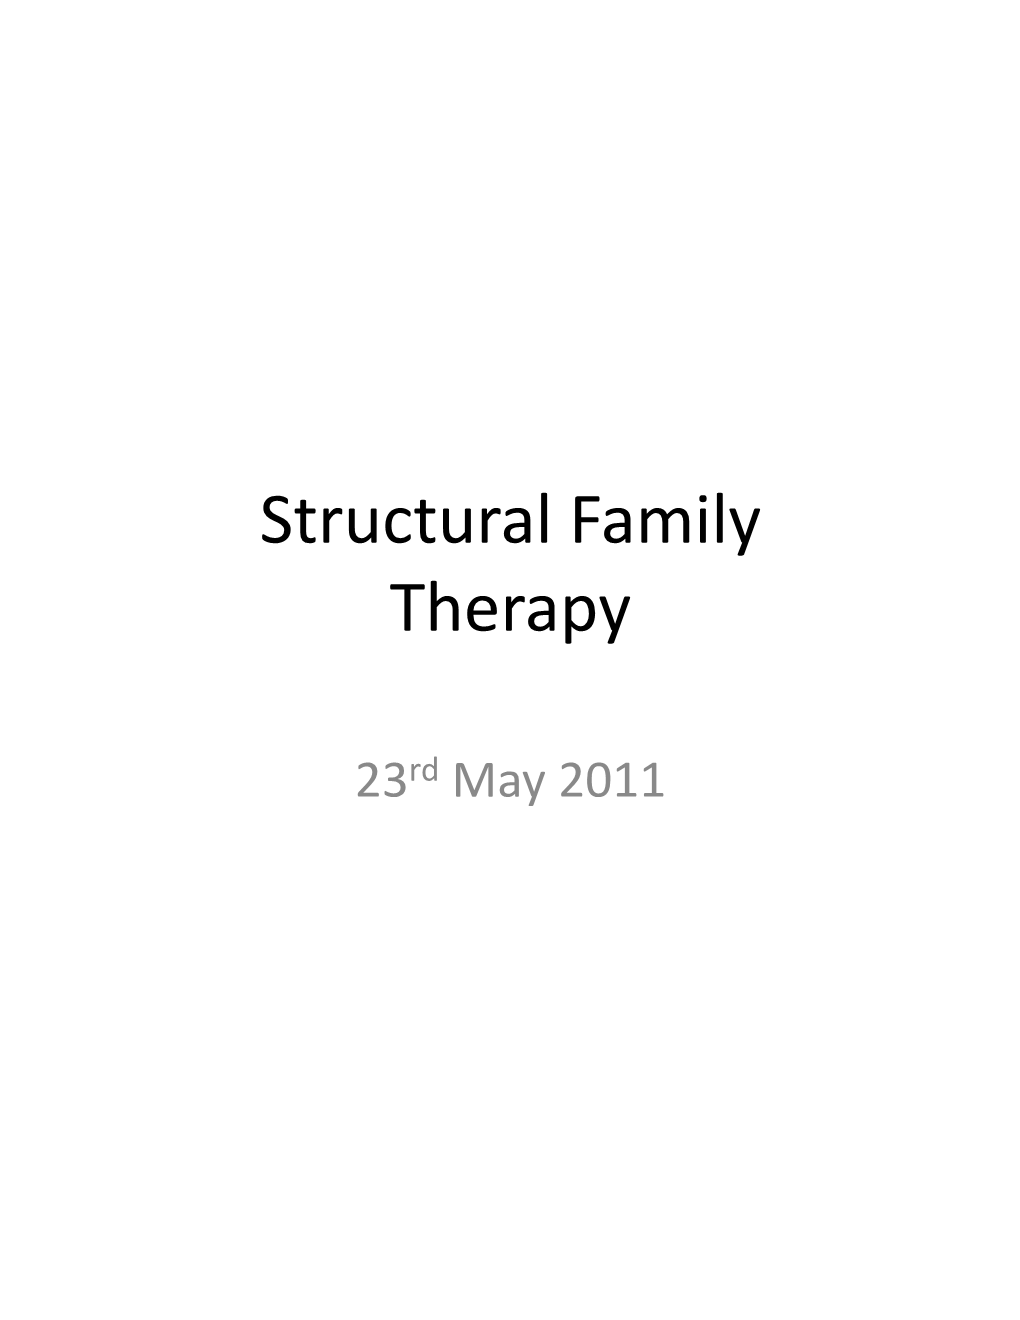 Structural Family Therapy Outline - Salvador Minuchin